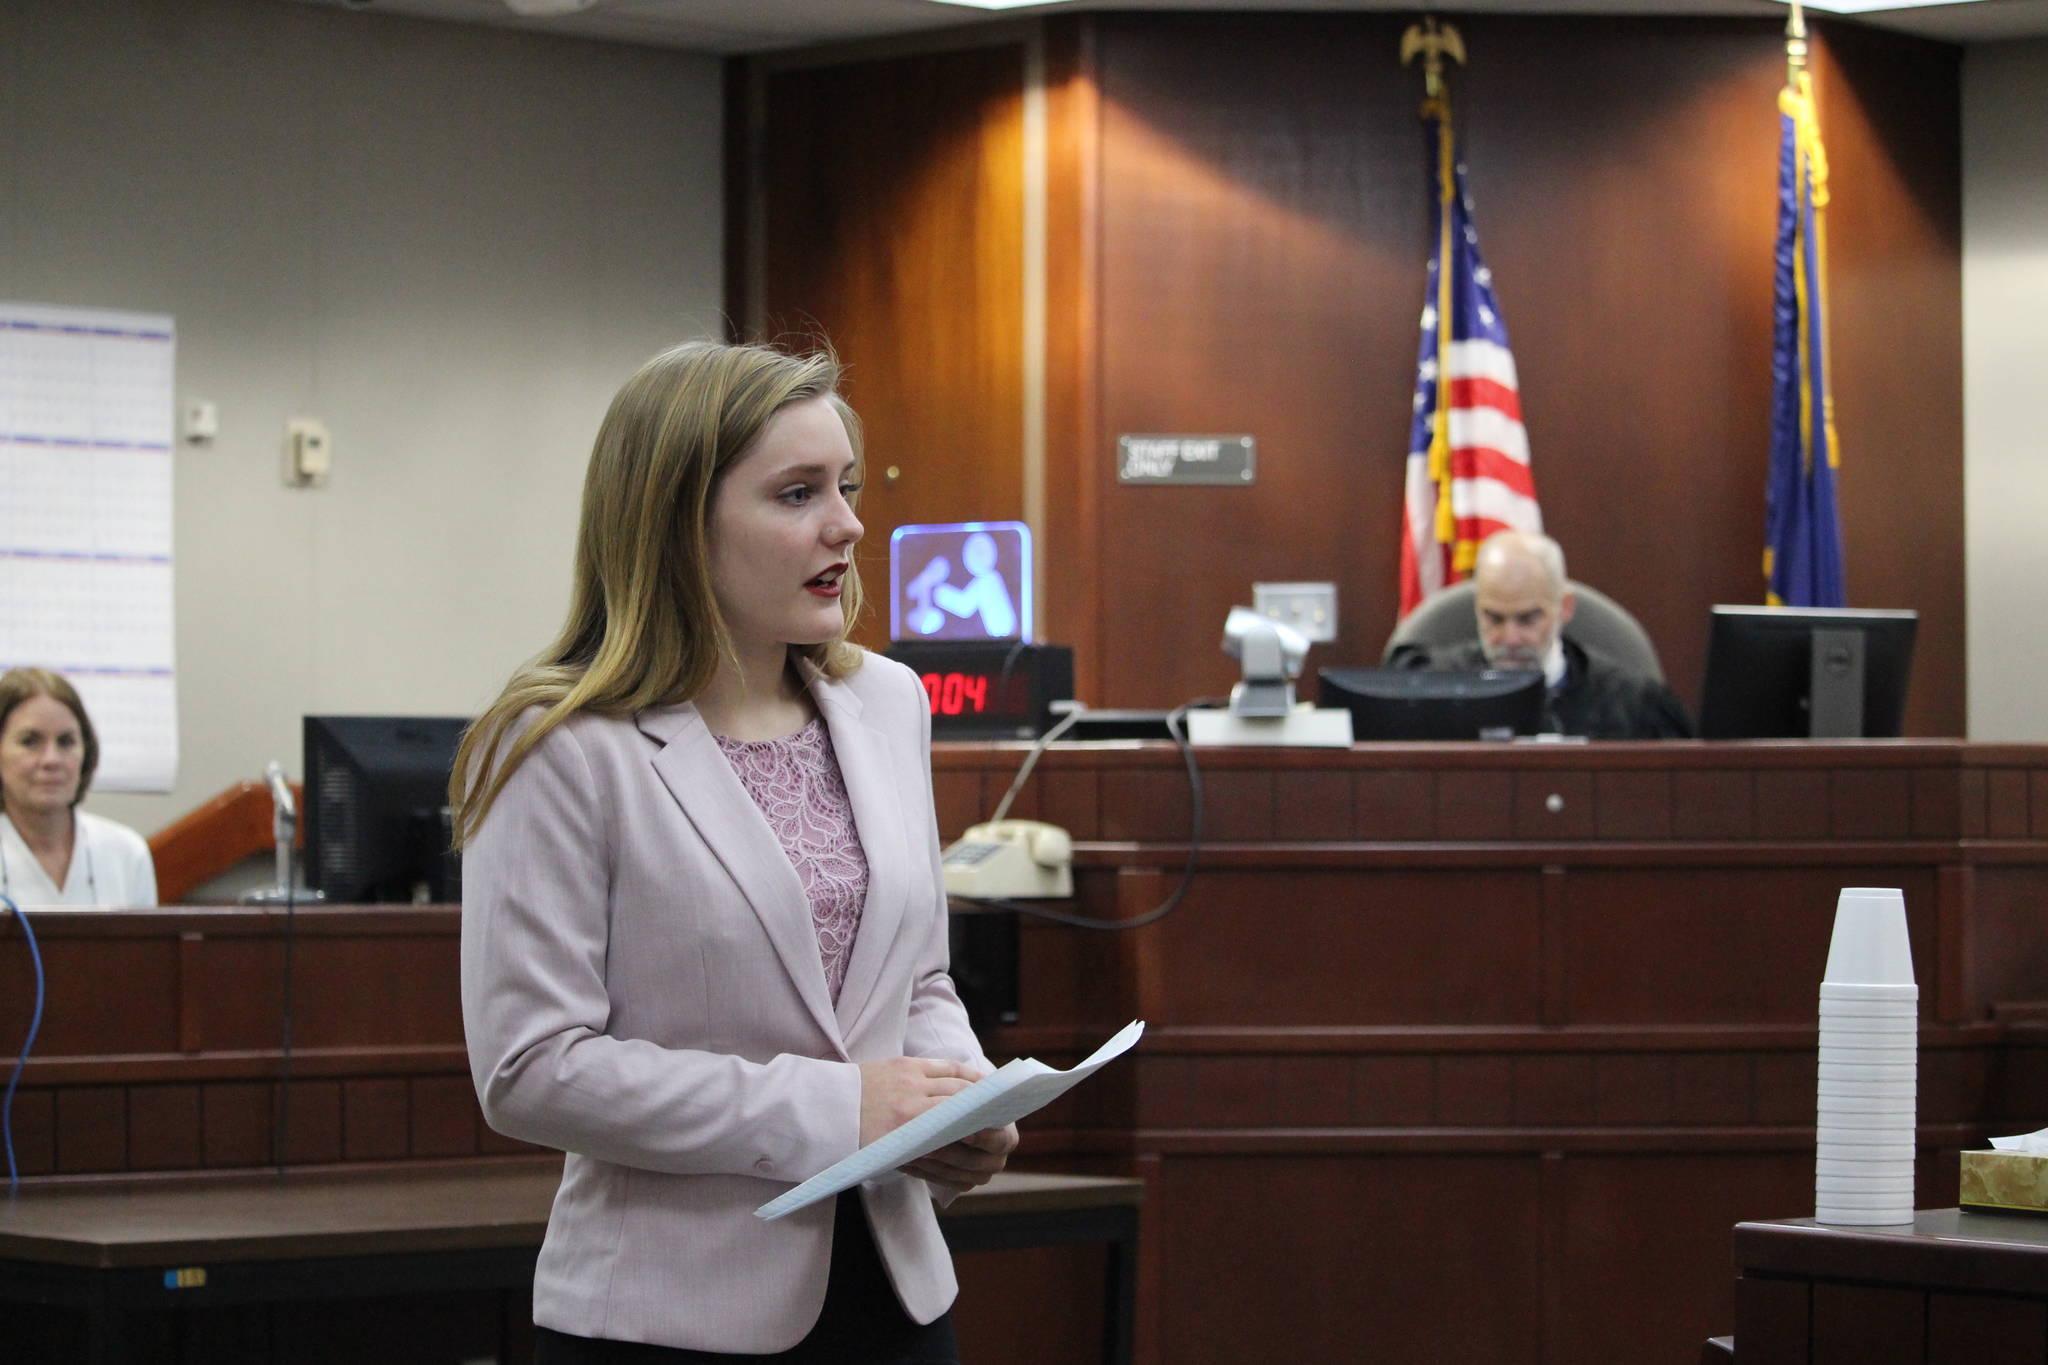 Nikiski Middle/High School senior Elora Reichert, in her role as prosecutor, gives an opening statement to the jury during a mock trial at the Kenai Courthouse on Dec. 3, 2019. (Photo by Brian Mazurek/Peninsula Clarion)